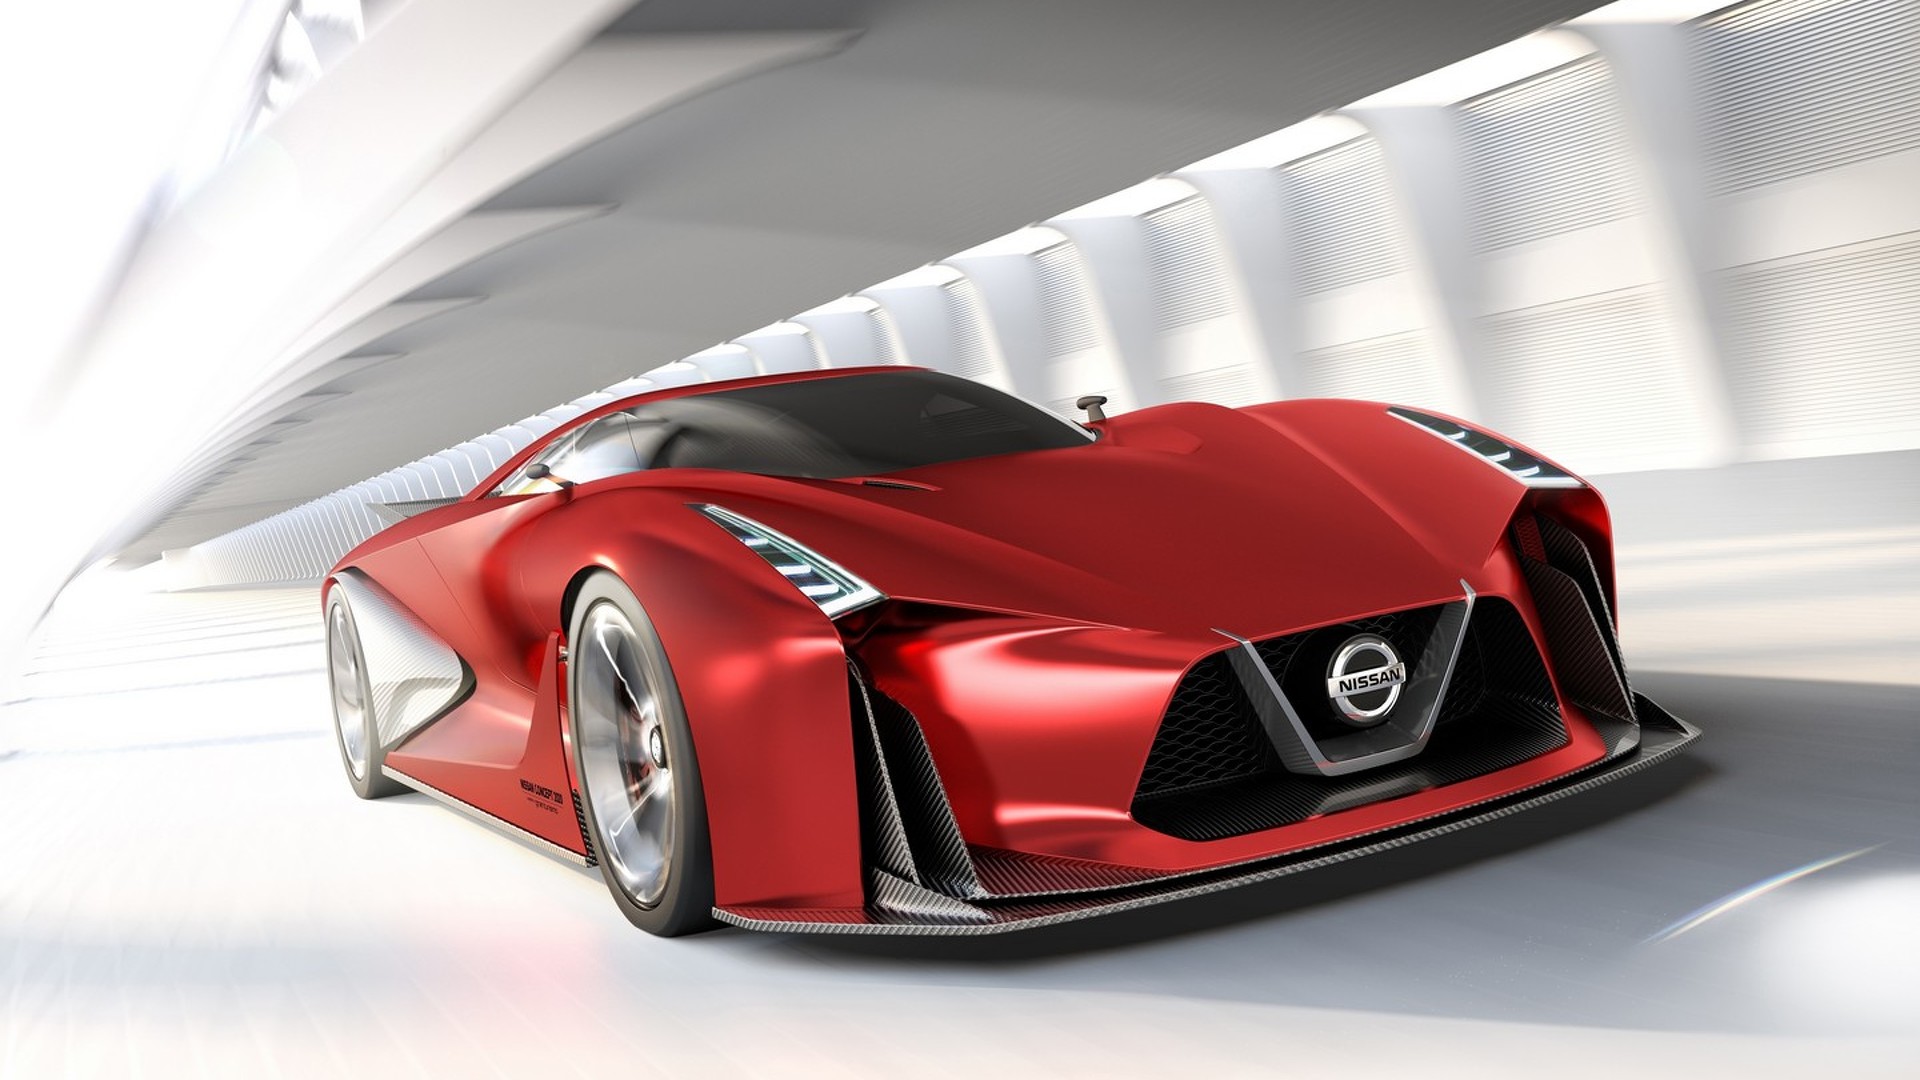 What is Nissan's fastest car?